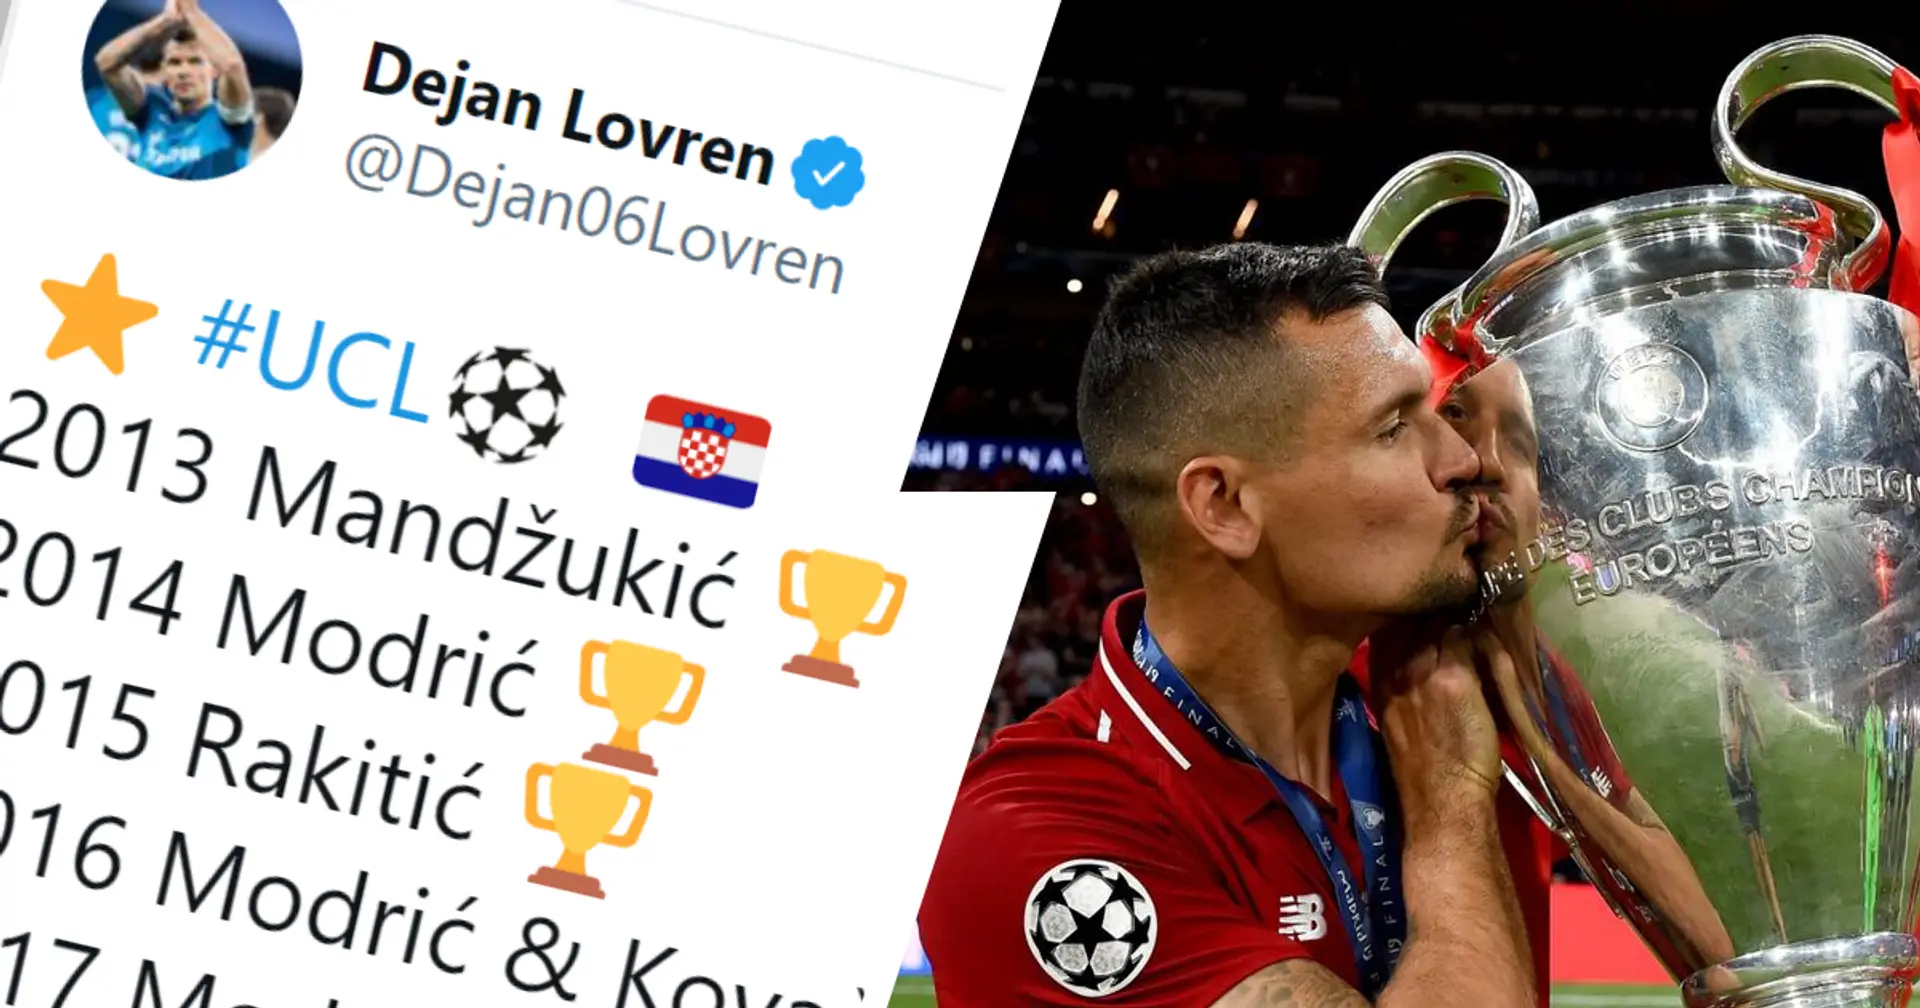 'They should buy one': Dejan Lovren's tongue in cheek advice to Man City on how to win Champions League